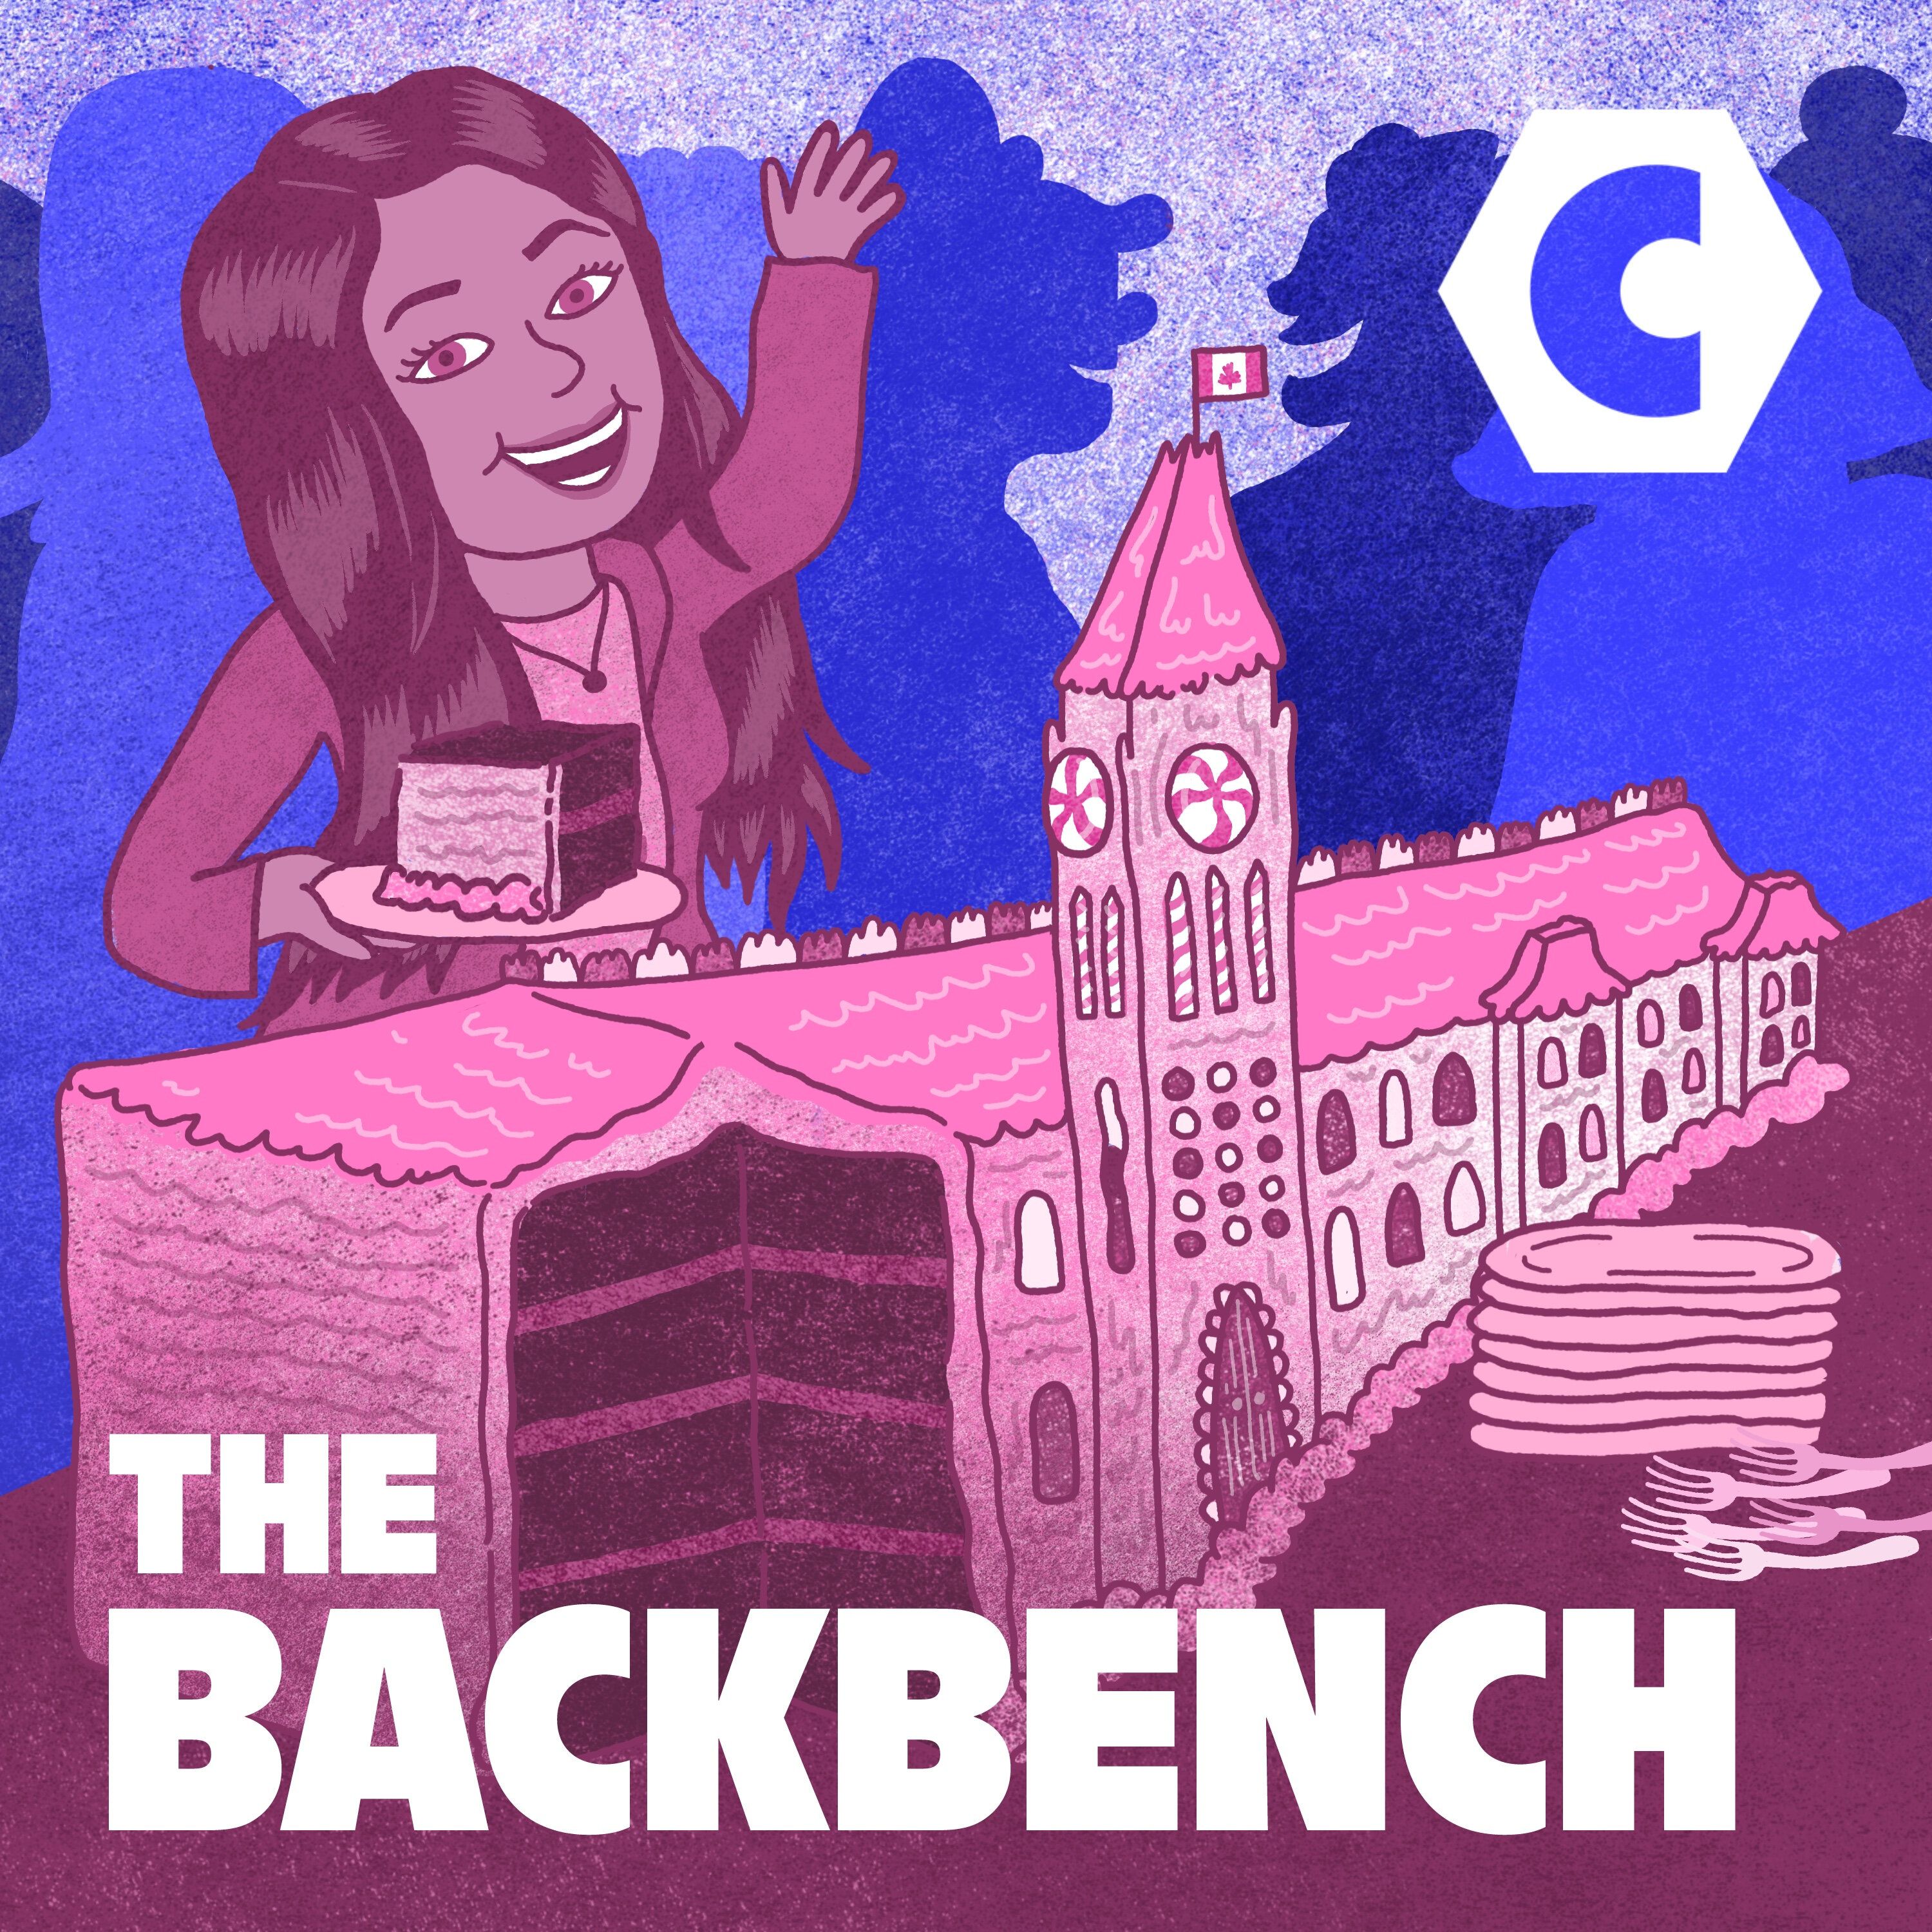 Introducing Our New Show: The Backbench